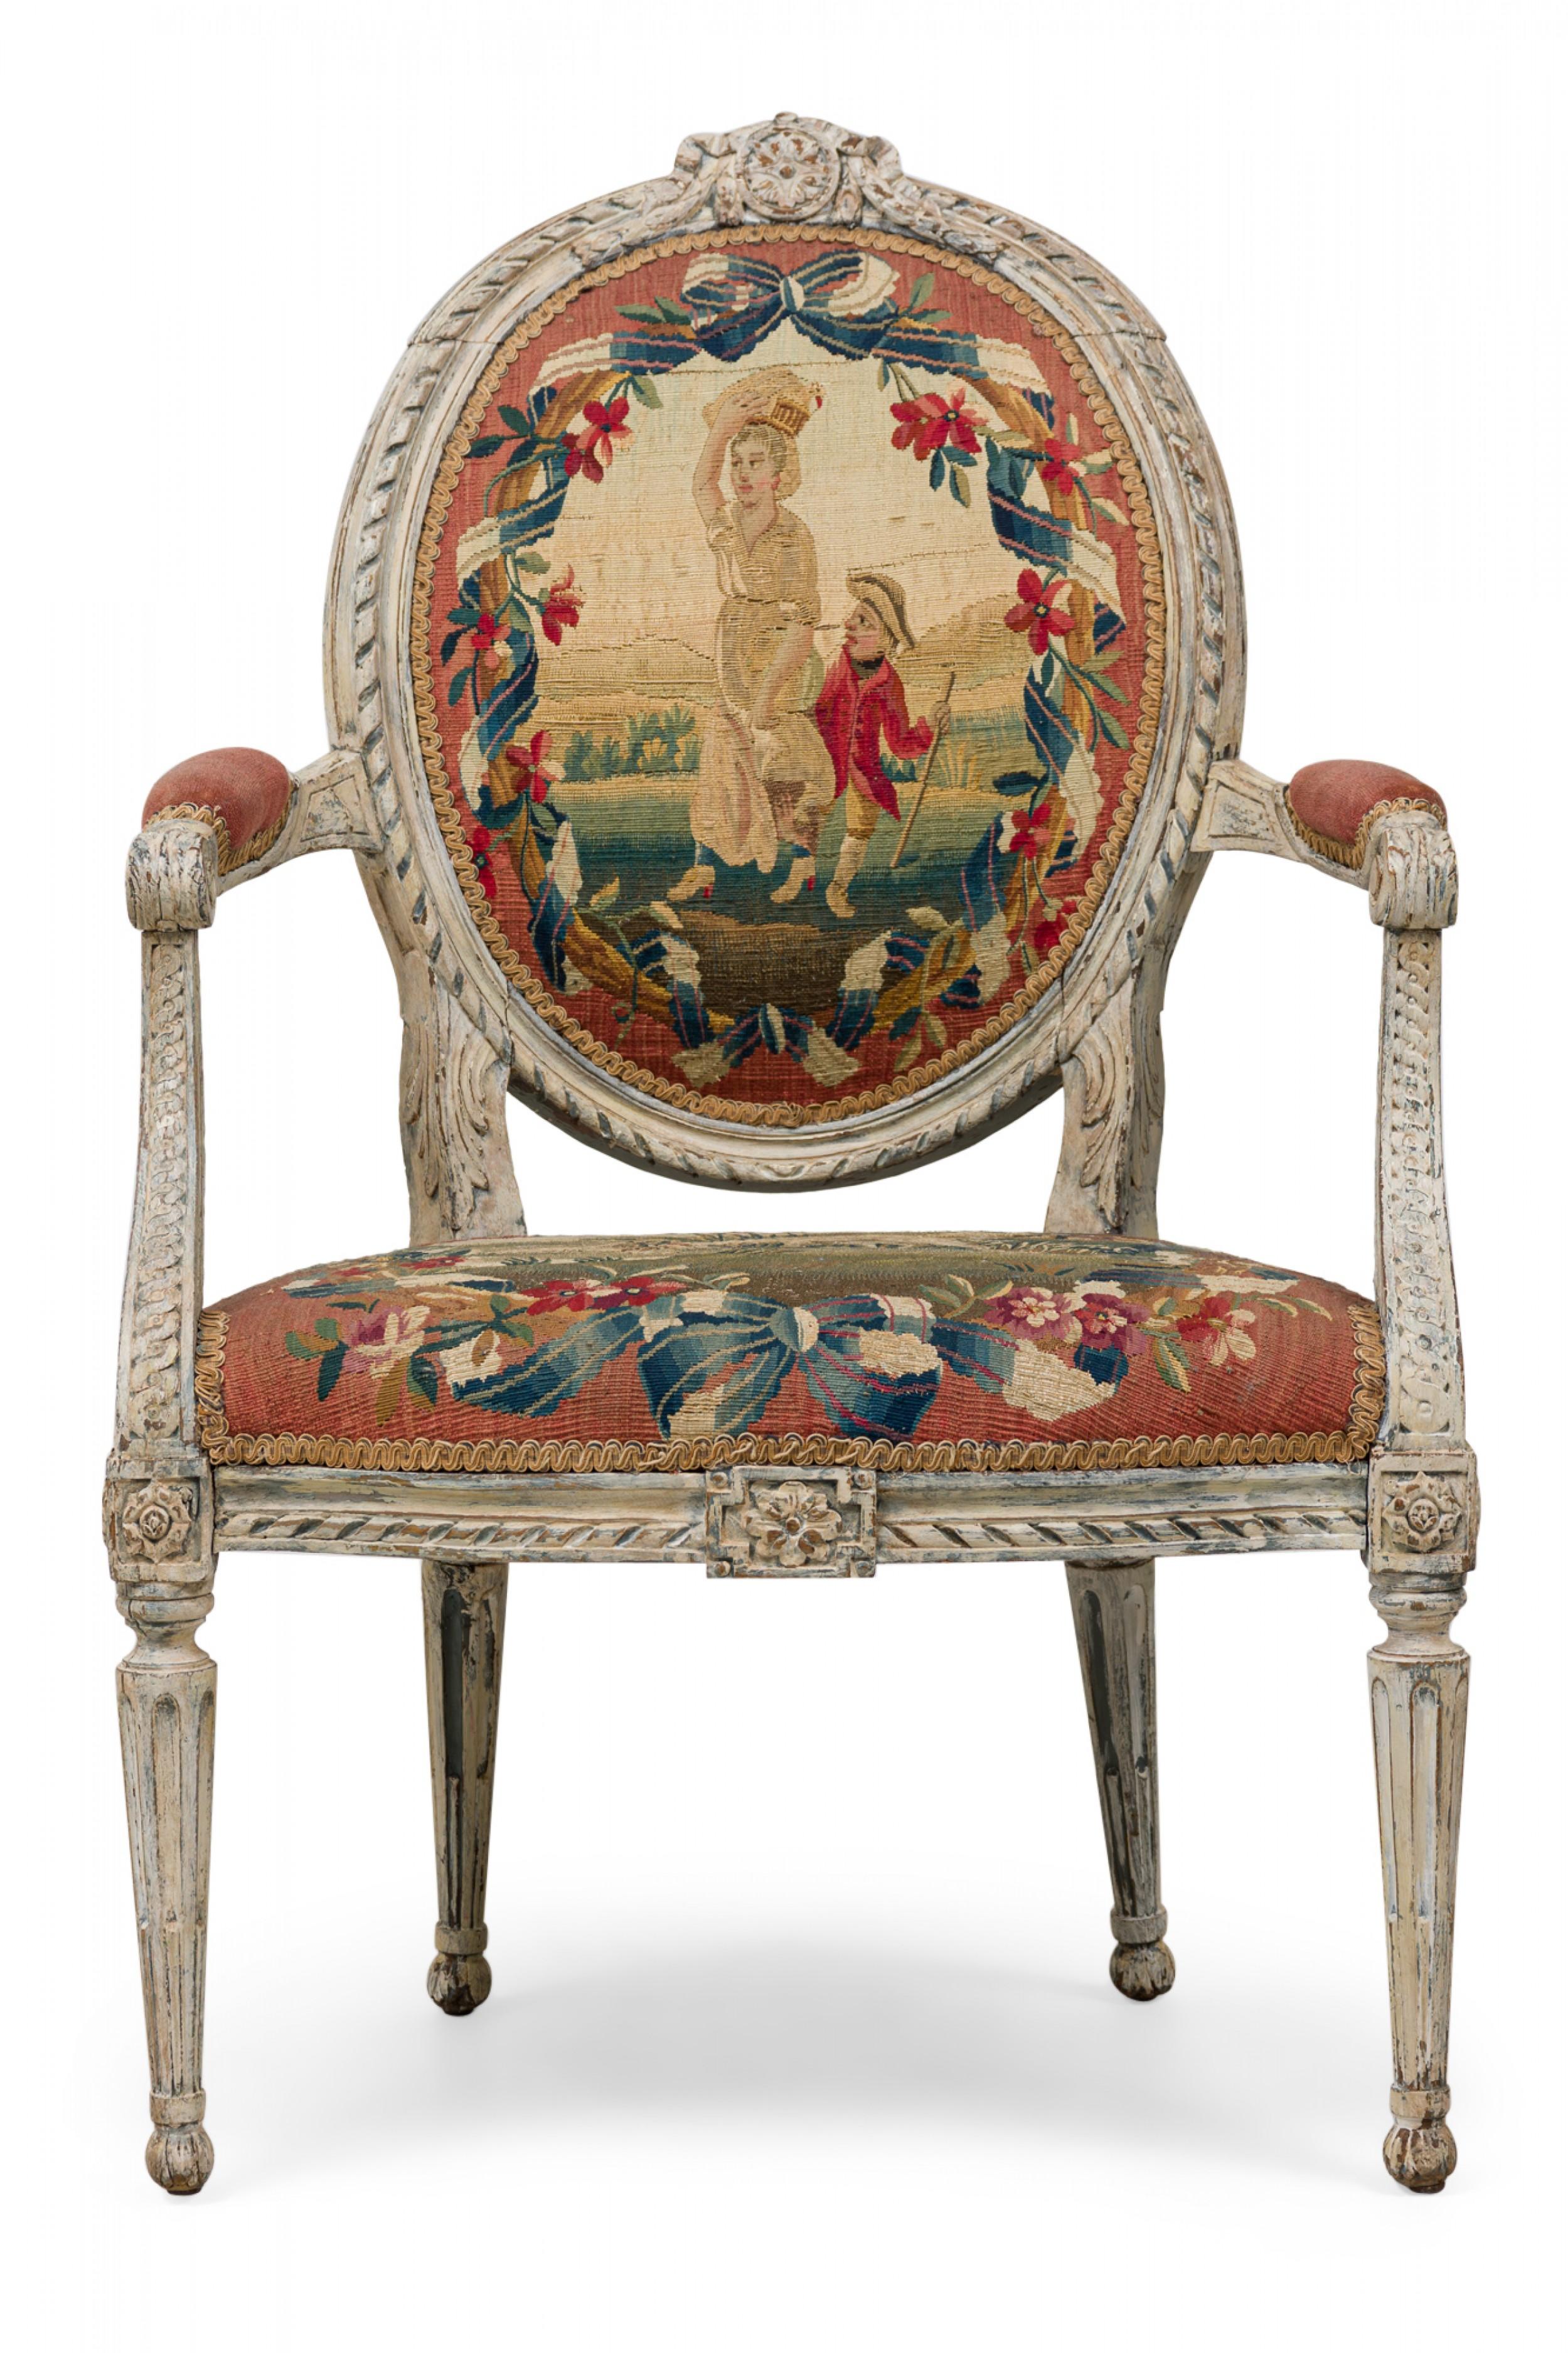 PAIR of Swedish neoclassic (18th century) armchairs with oversized frames carved and painted in a distressed off-white, with oval backrests and seats upholstered in French Beauvais tapestry depicting 2 distinct figural courtyard scenes, standing on